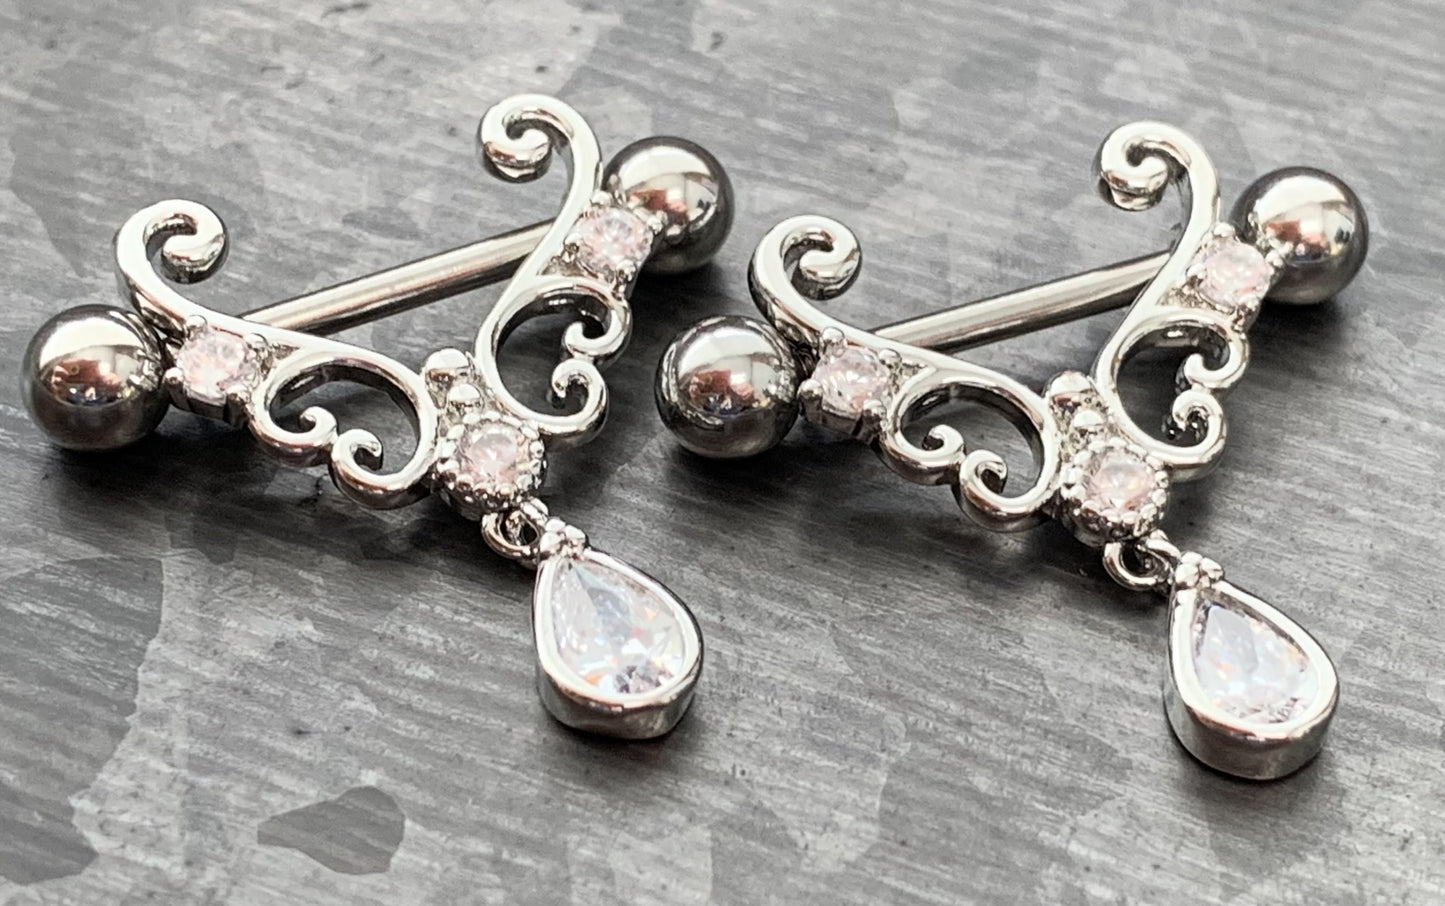 PAIR of Heart Filigree with CZ Teardrop Gem Steel Nipple Barbells/Shields/Rings - 16g, 10mm wearable length in Silver, Gold & Rose Gold!